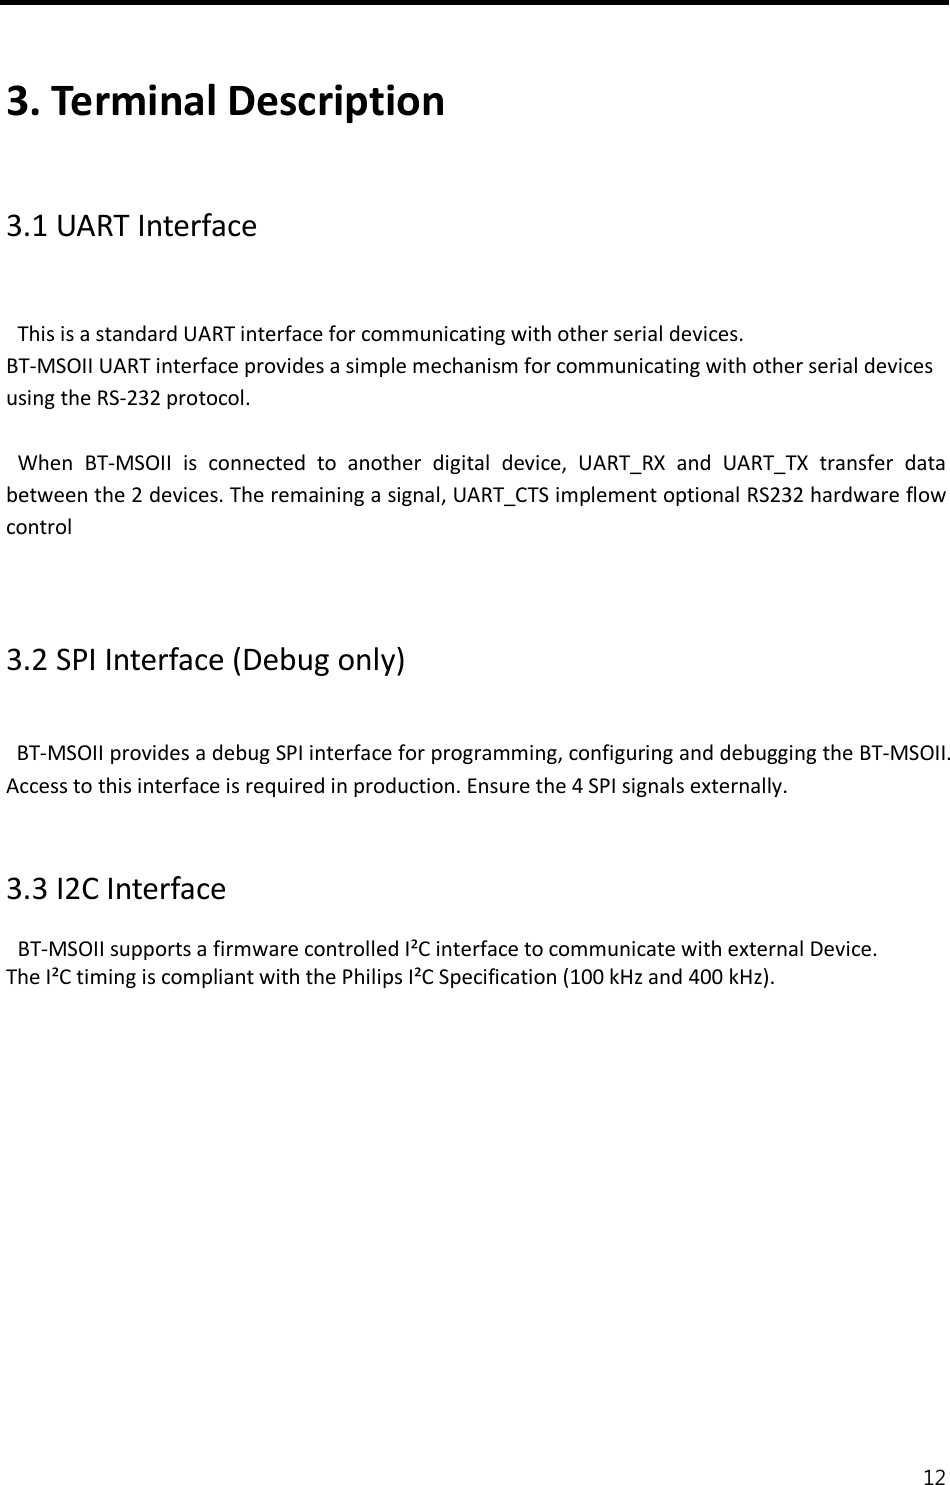  12   3. Terminal Description  3.1 UART Interface  This is a standard UART interface for communicating with other serial devices. BT-MSOII UART interface provides a simple mechanism for communicating with other serial devices using the RS-232 protocol.  When  BT-MSOII  is  connected  to  another  digital  device,  UART_RX  and  UART_TX  transfer  data between the 2 devices. The remaining a signal, UART_CTS implement optional RS232 hardware flow control   3.2 SPI Interface (Debug only)   BT-MSOII provides a debug SPI interface for programming, configuring and debugging the BT-MSOII. Access to this interface is required in production. Ensure the 4 SPI signals externally.     3.3 I2C Interface BT-MSOII supports a firmware controlled I²C interface to communicate with external Device. The I²C timing is compliant with the Philips I²C Specification (100 kHz and 400 kHz).               